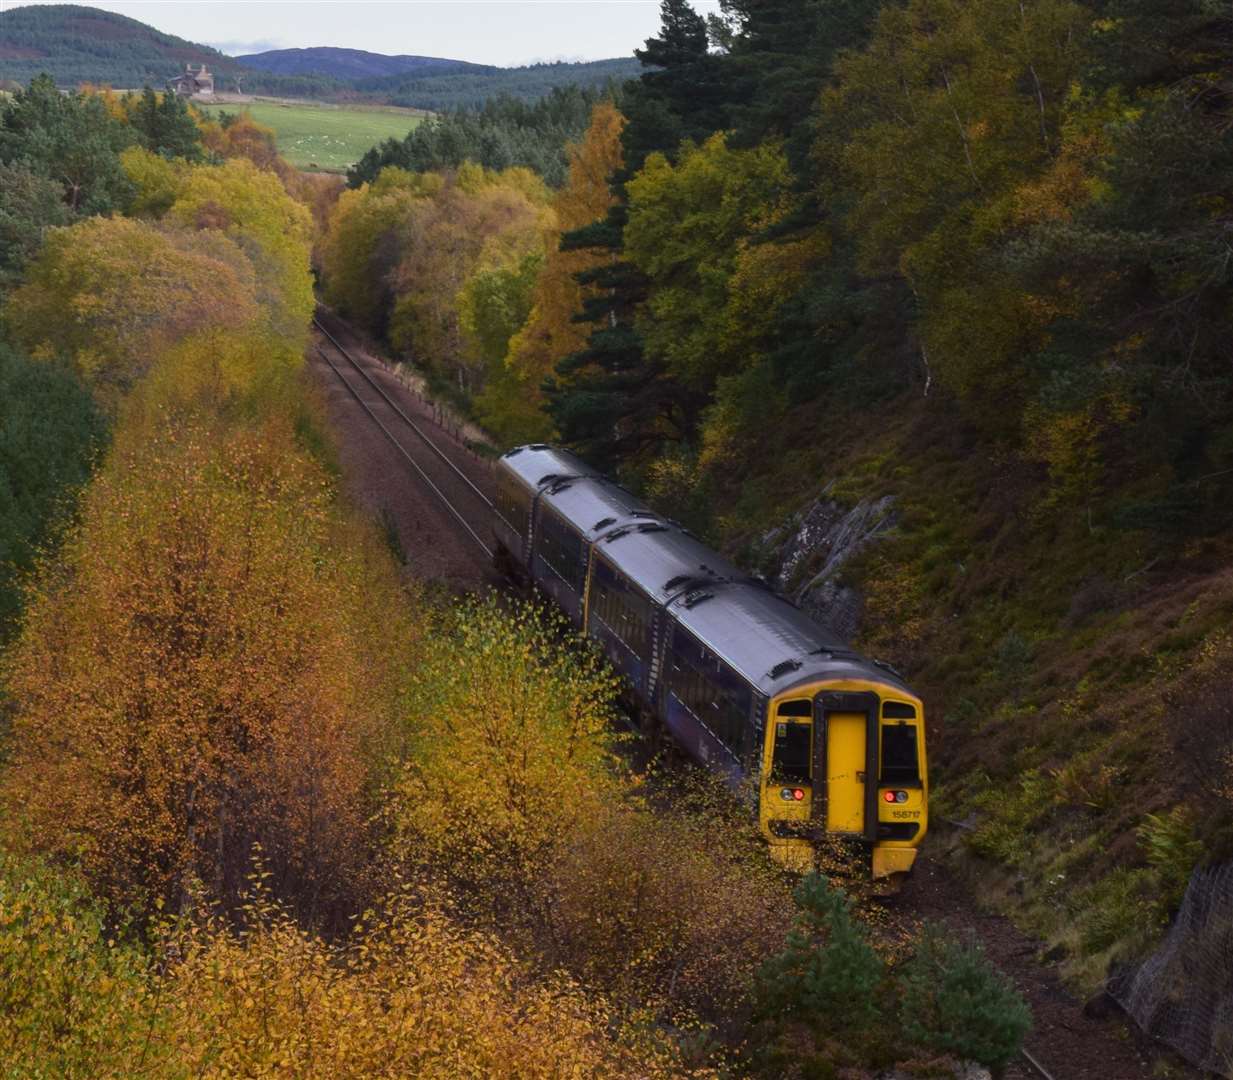 A ScotRail train travelling on the Highland mainline.